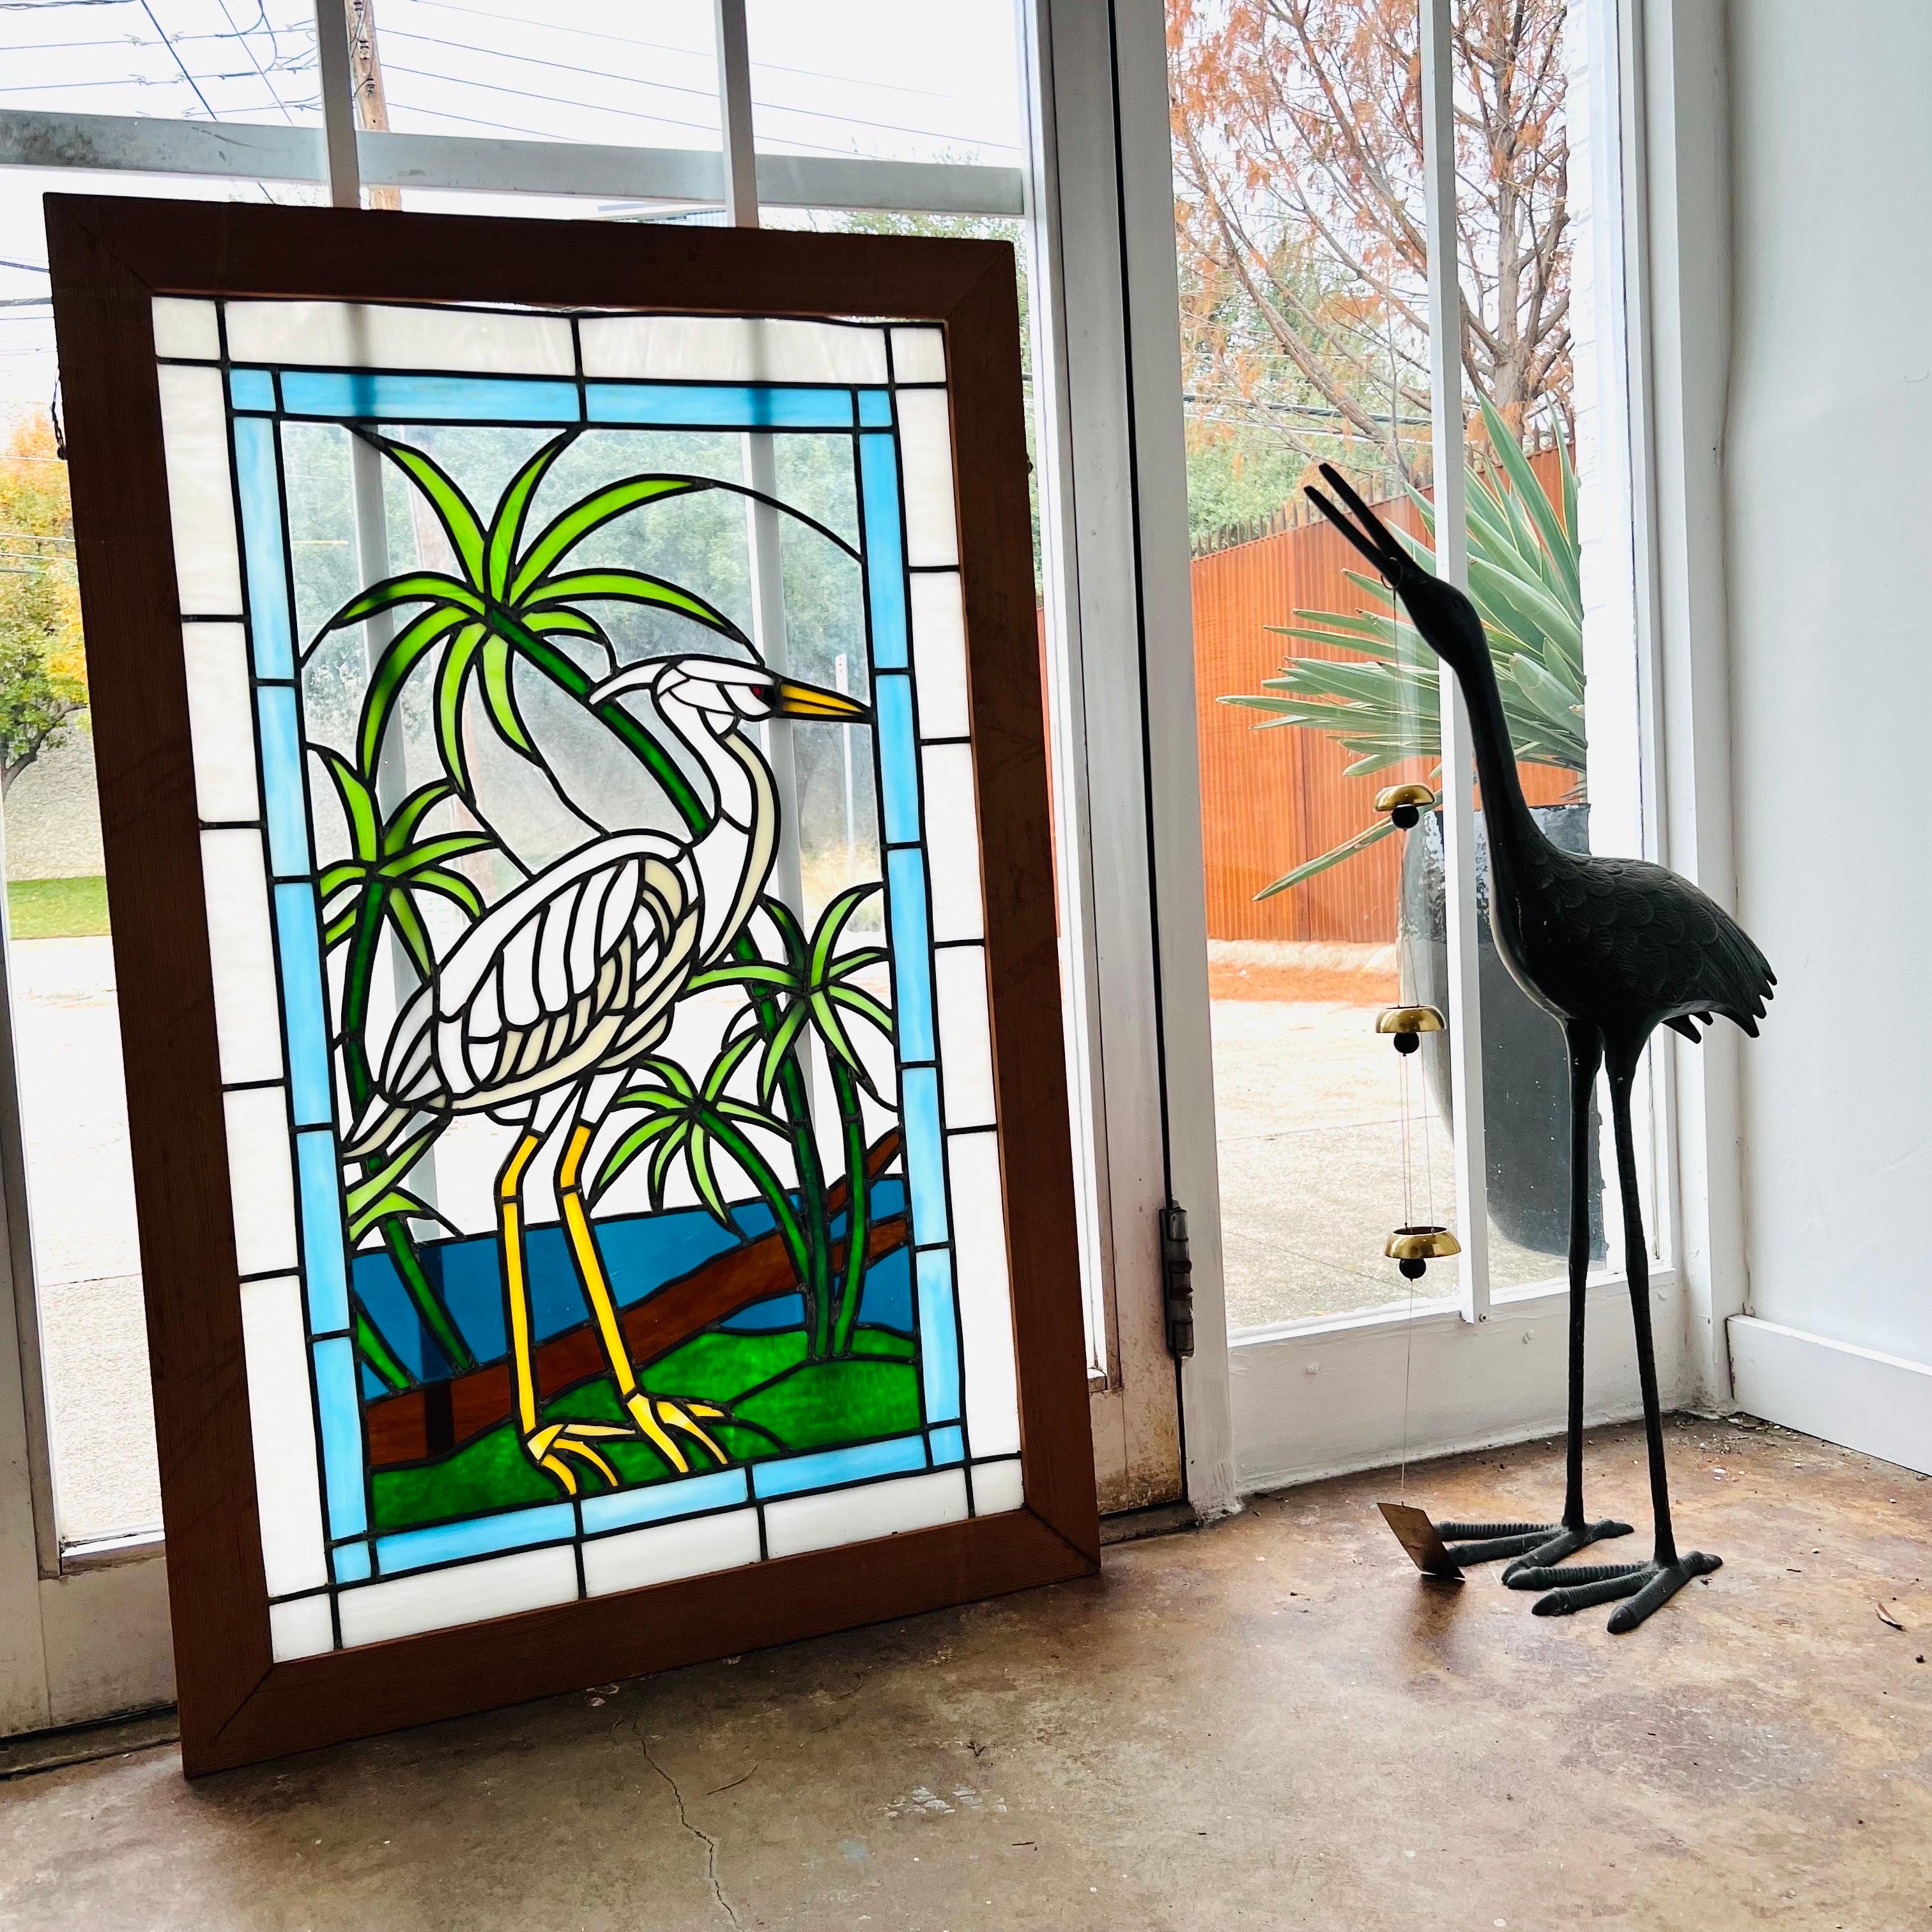 Vintage framed stained glass panel featuring a crane with palm trees. Some cosmetic imperfections with frame (pictured) but no breaks in glass, good vintage condition.